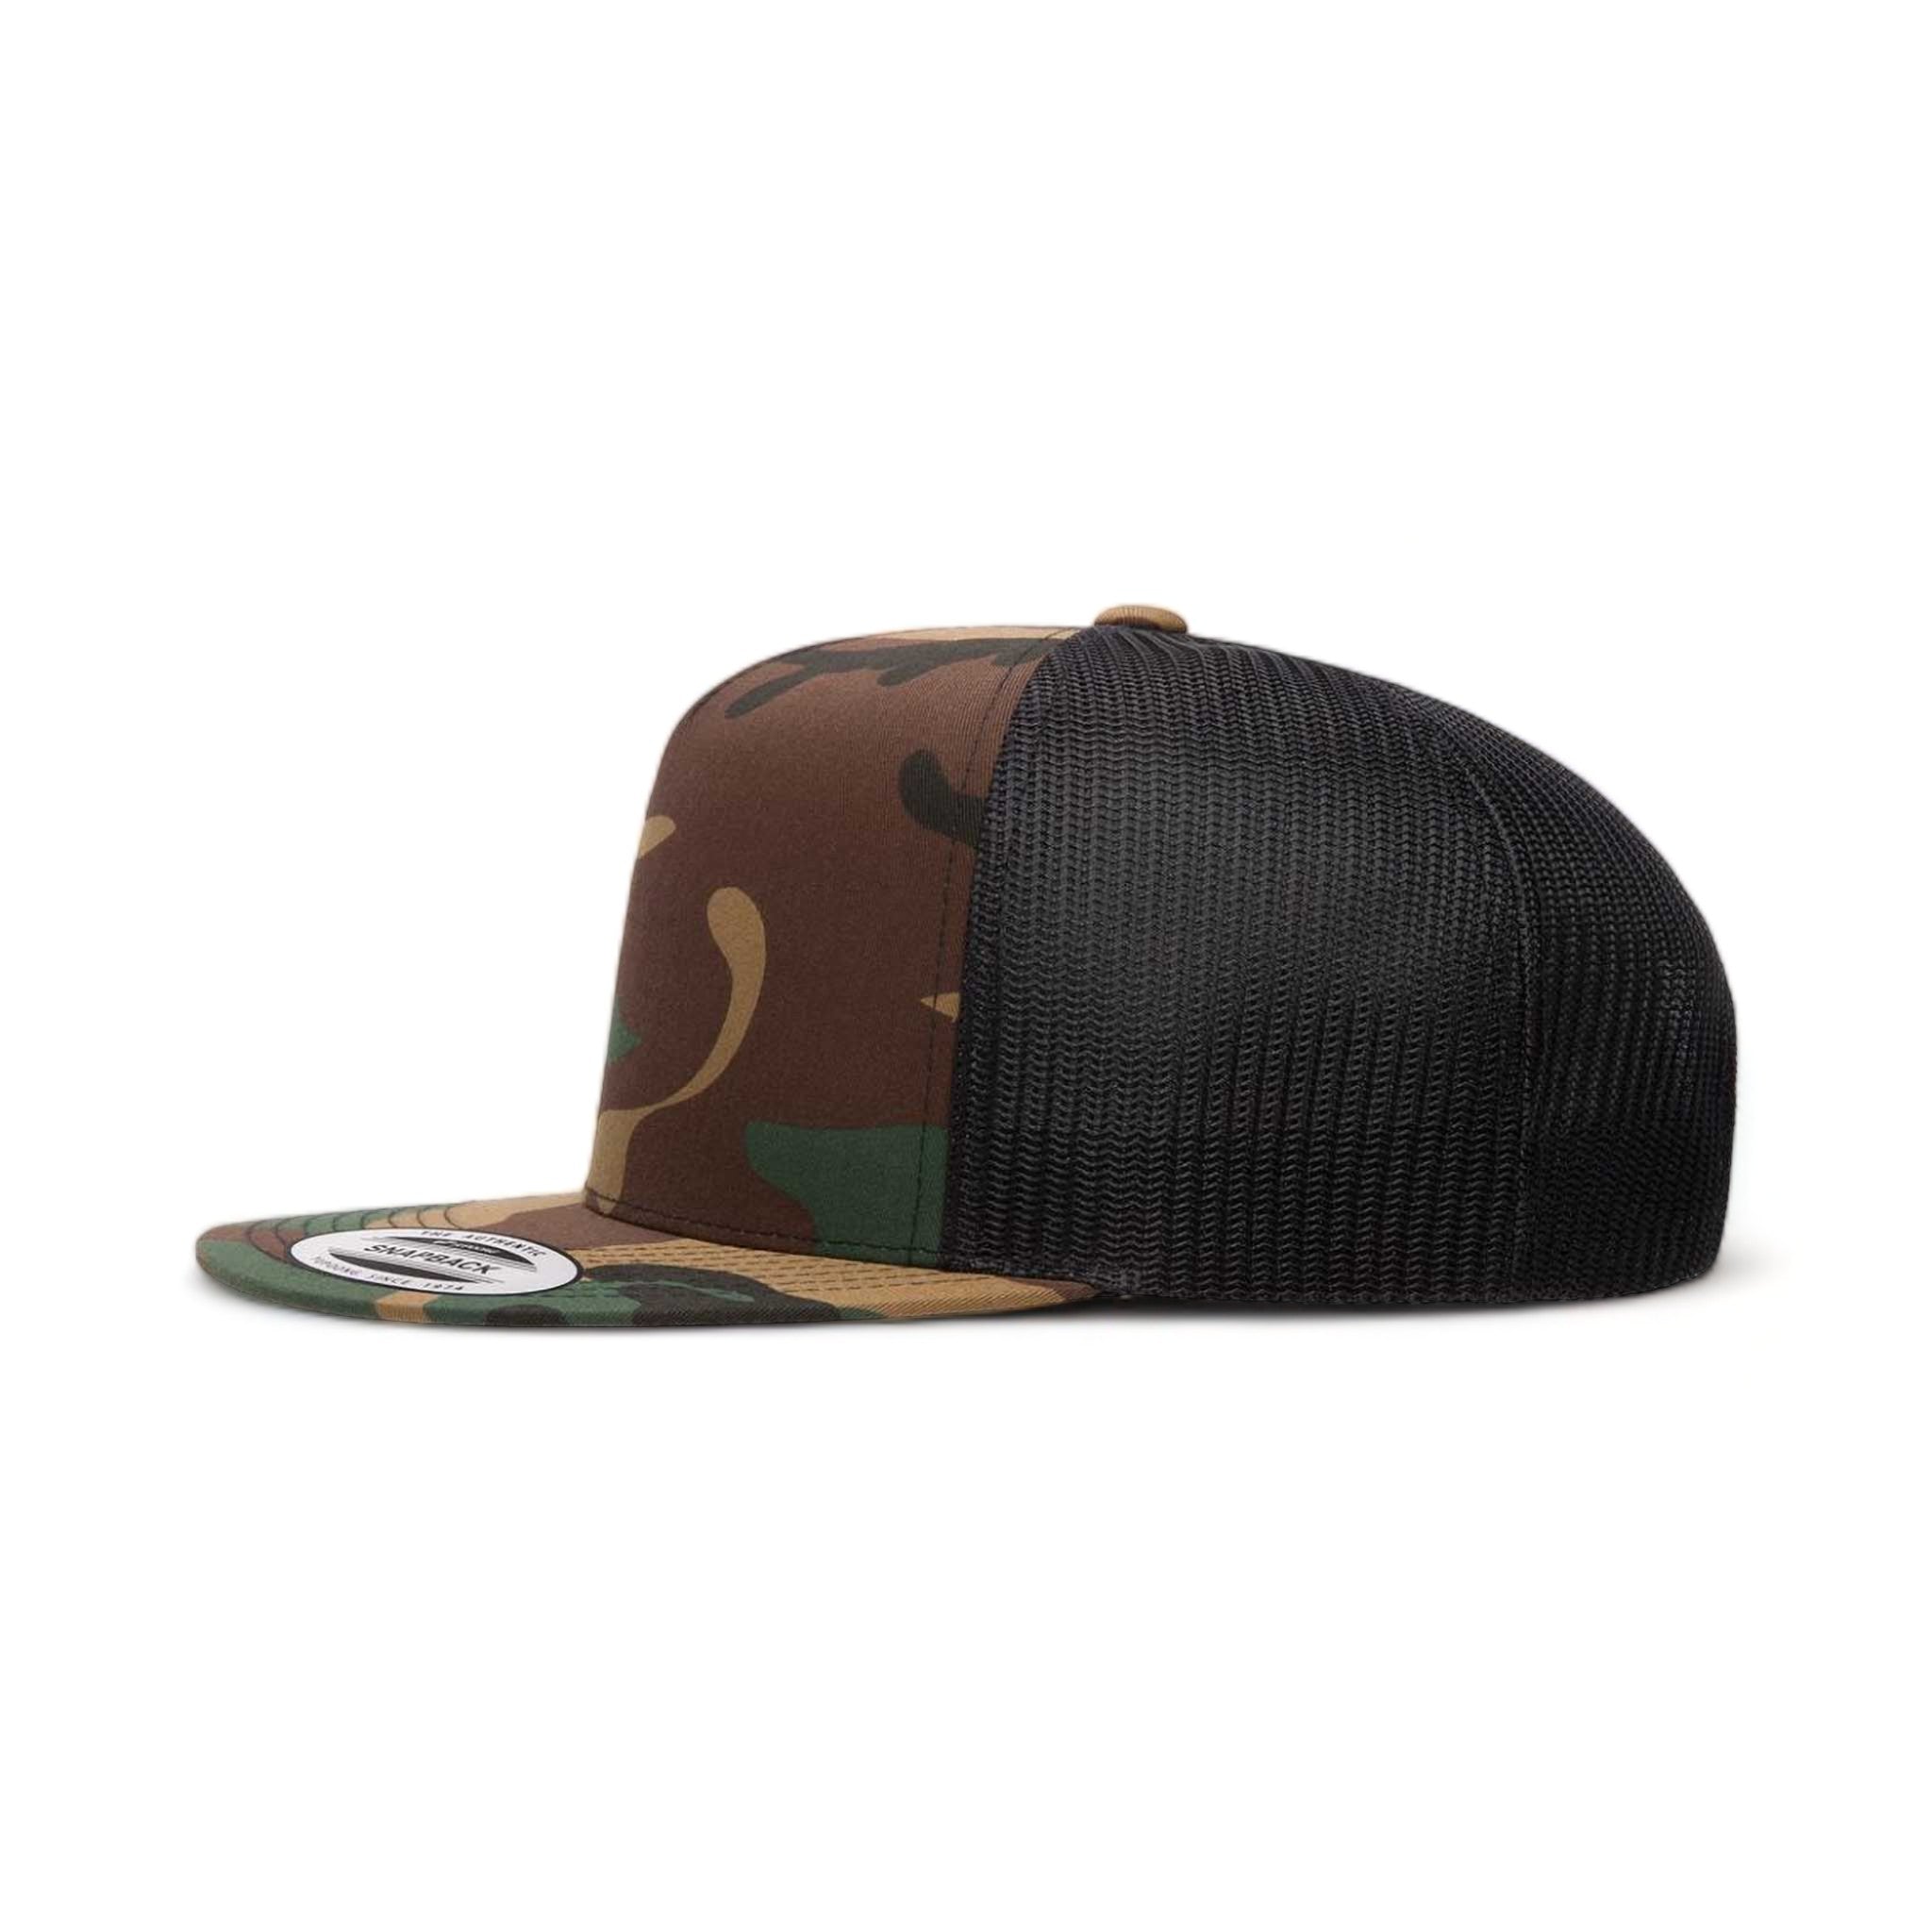 Side view of YP Classics 6006 custom hat in green camo and black